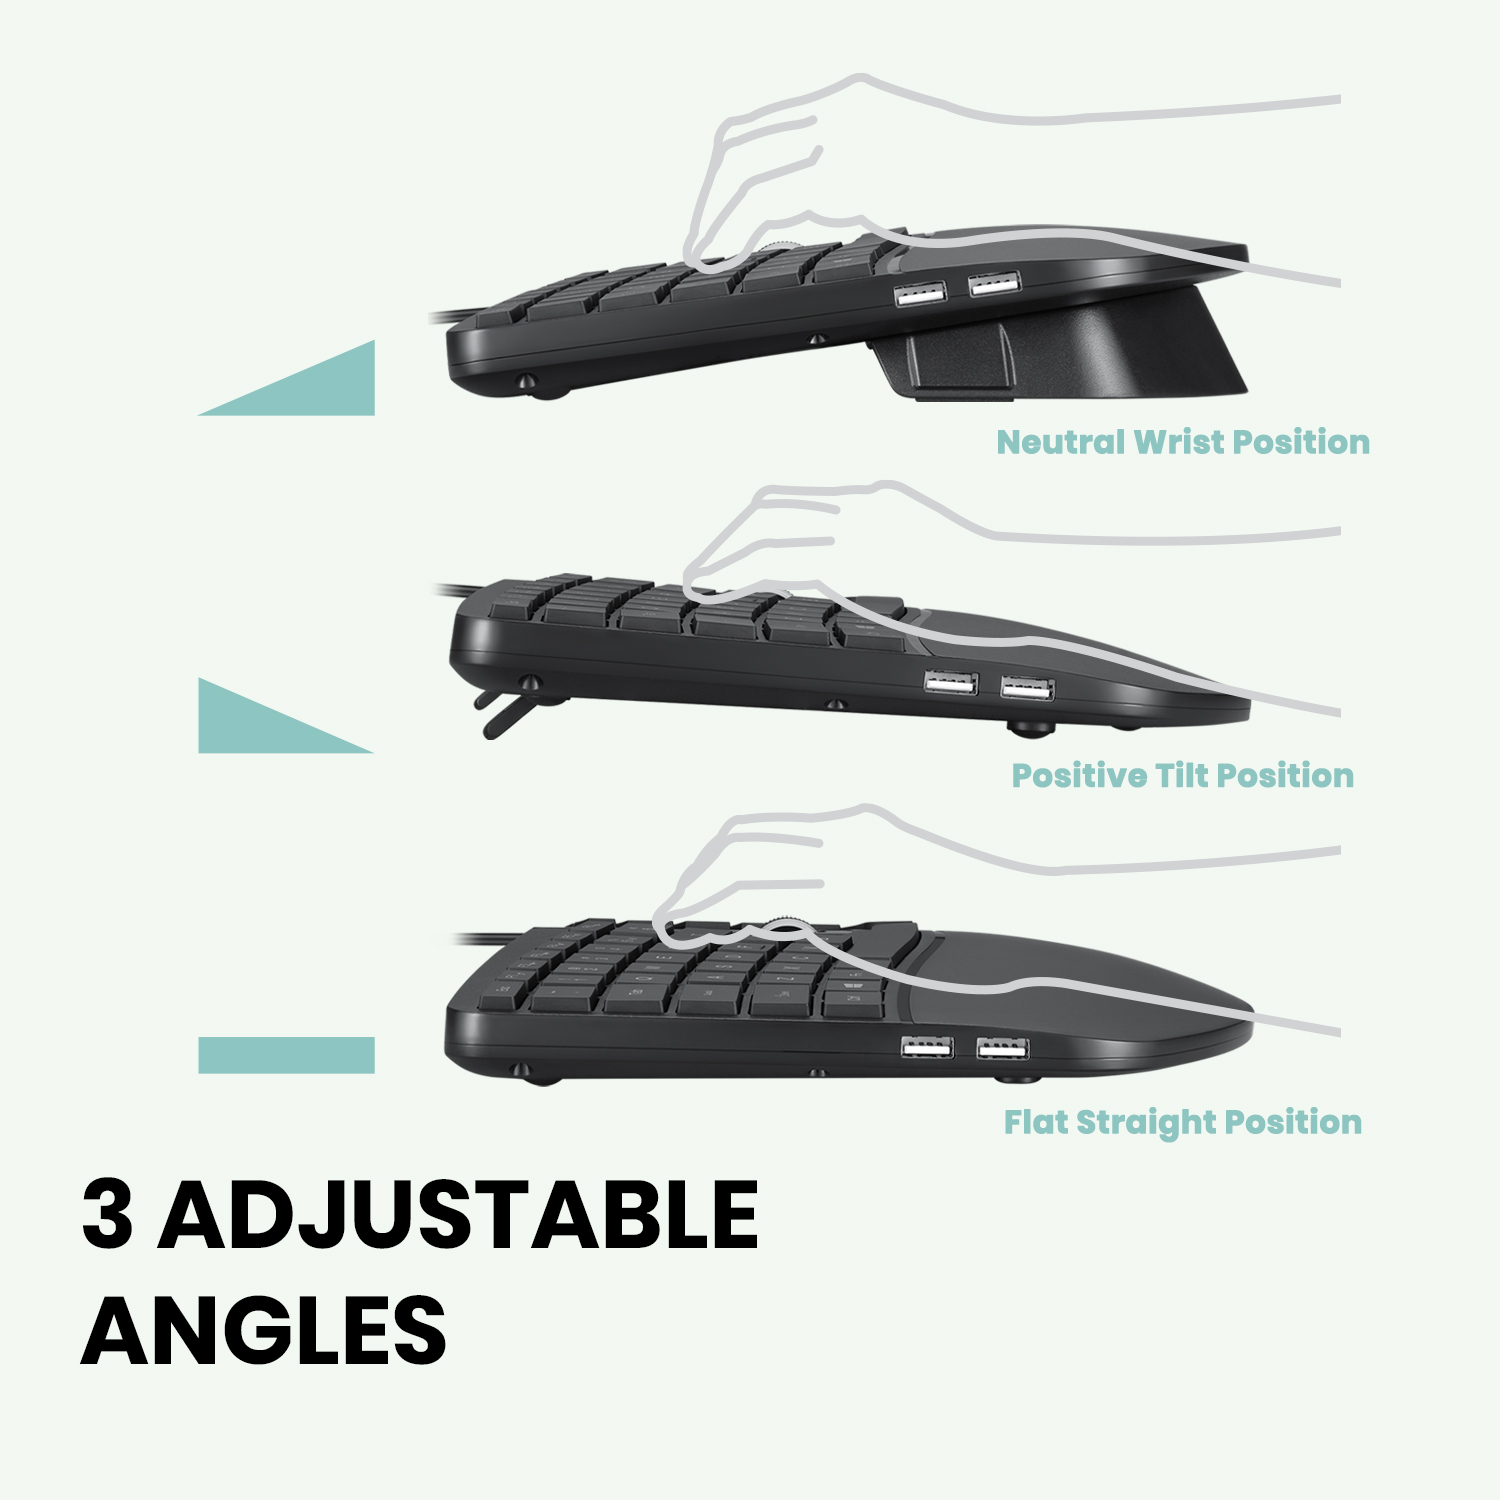 Adjust to your ideal typing angle